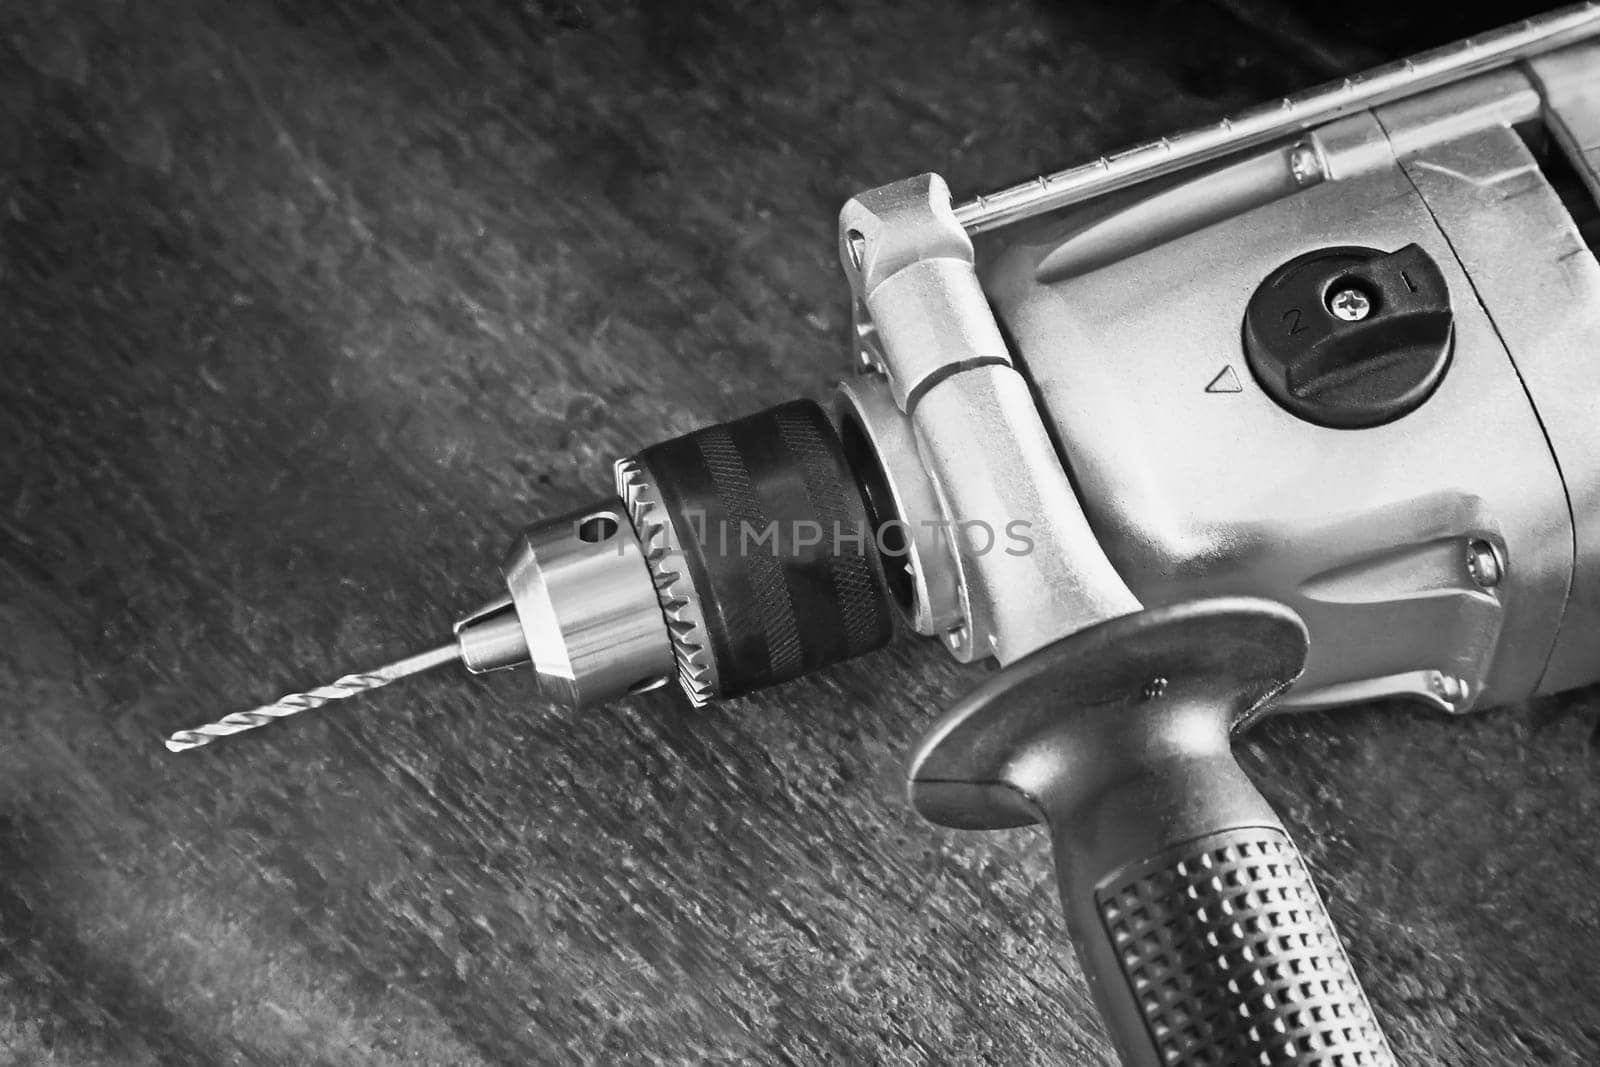 On a carpenter's workbench lies a compact electric hand drill.